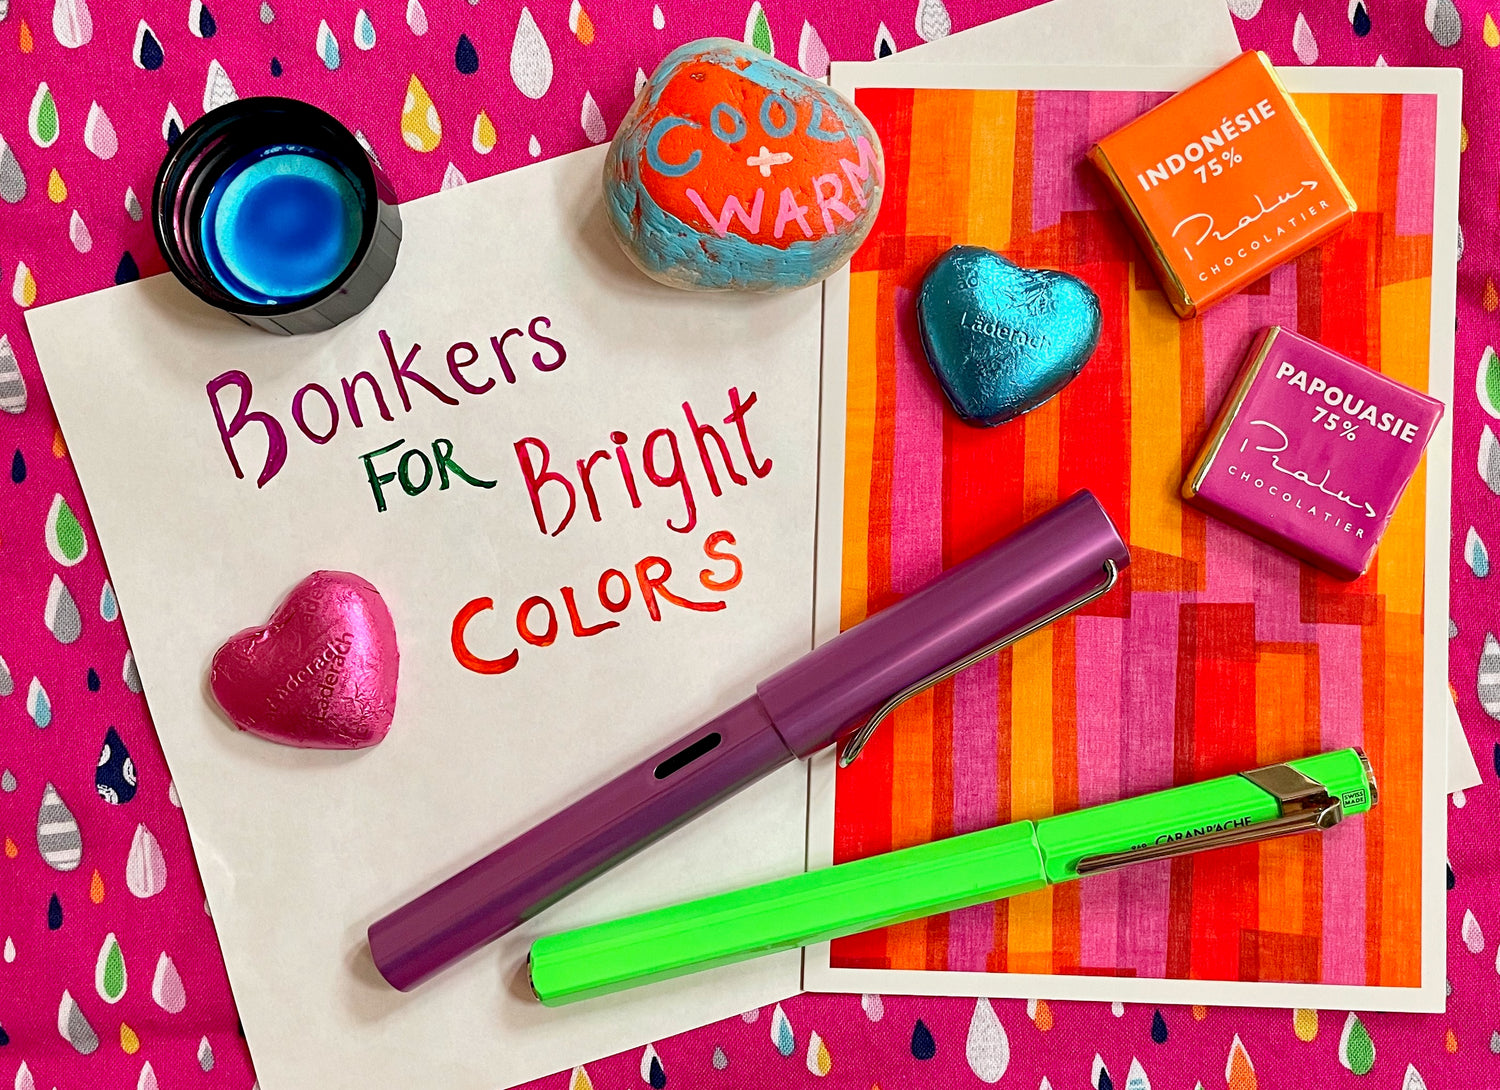 Bonkers for Bright Colors!